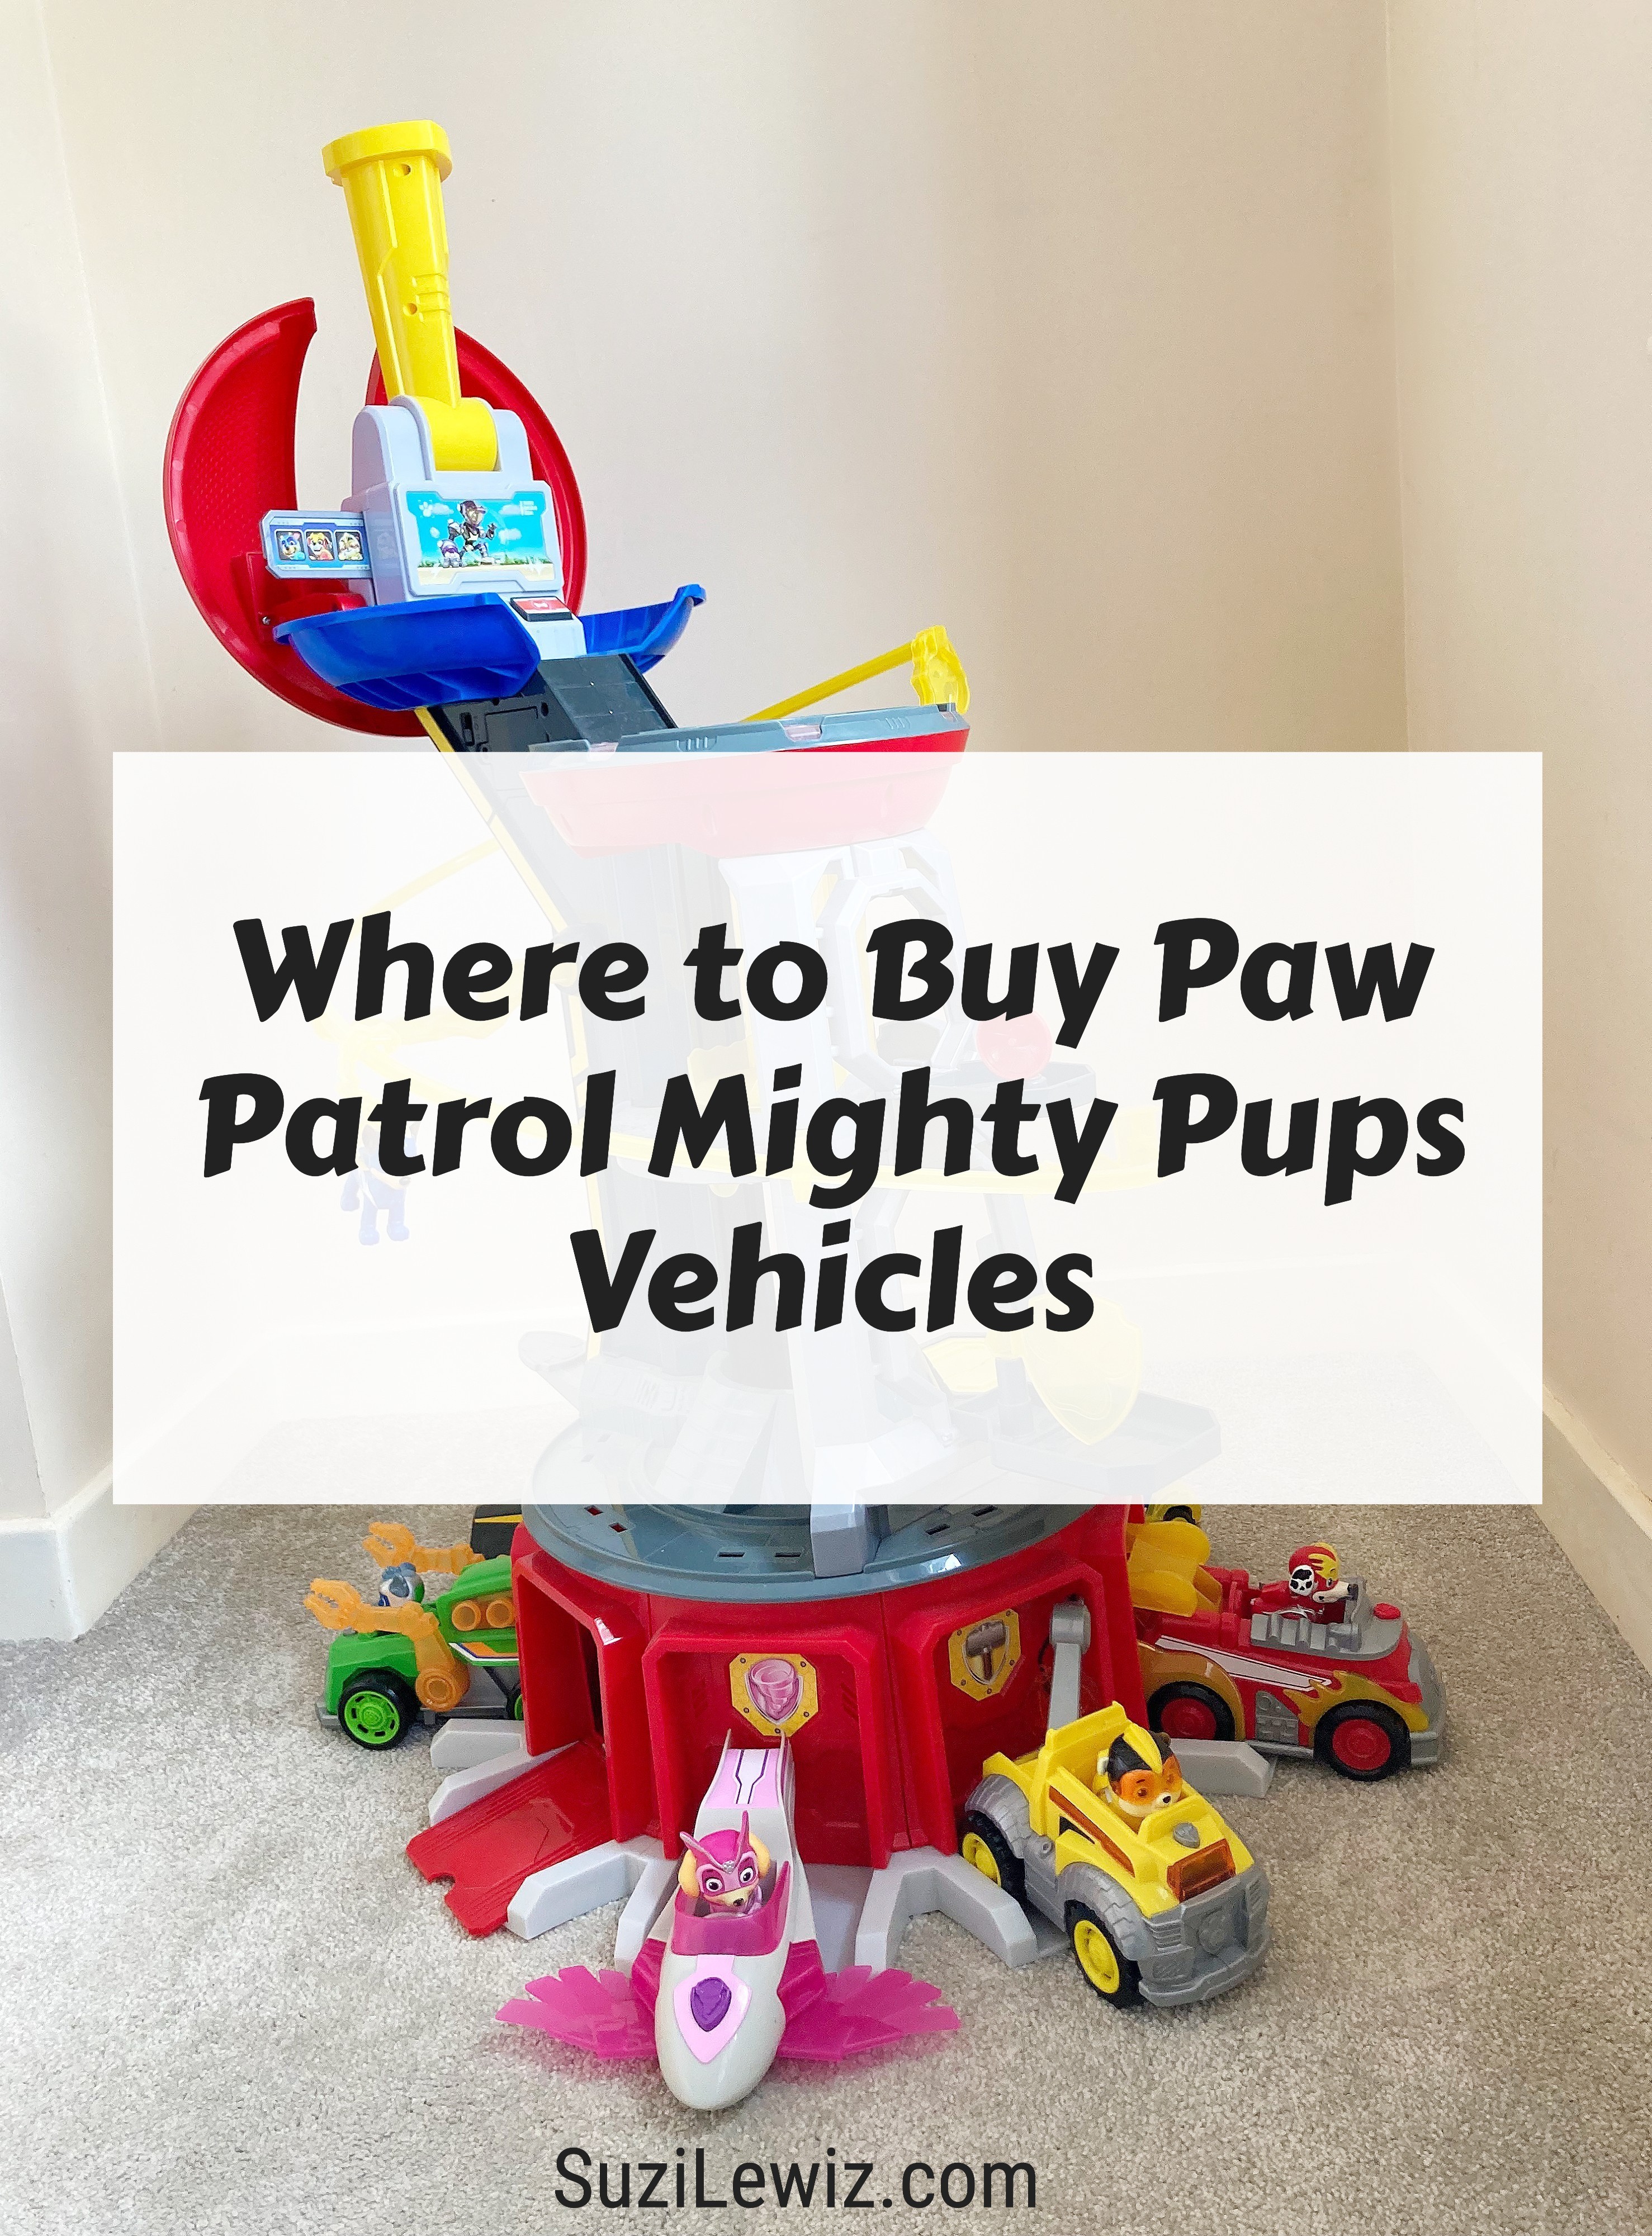 Paw Patrol Mighty Pups Tower and Vehicles - Where to buy Mighty Pups